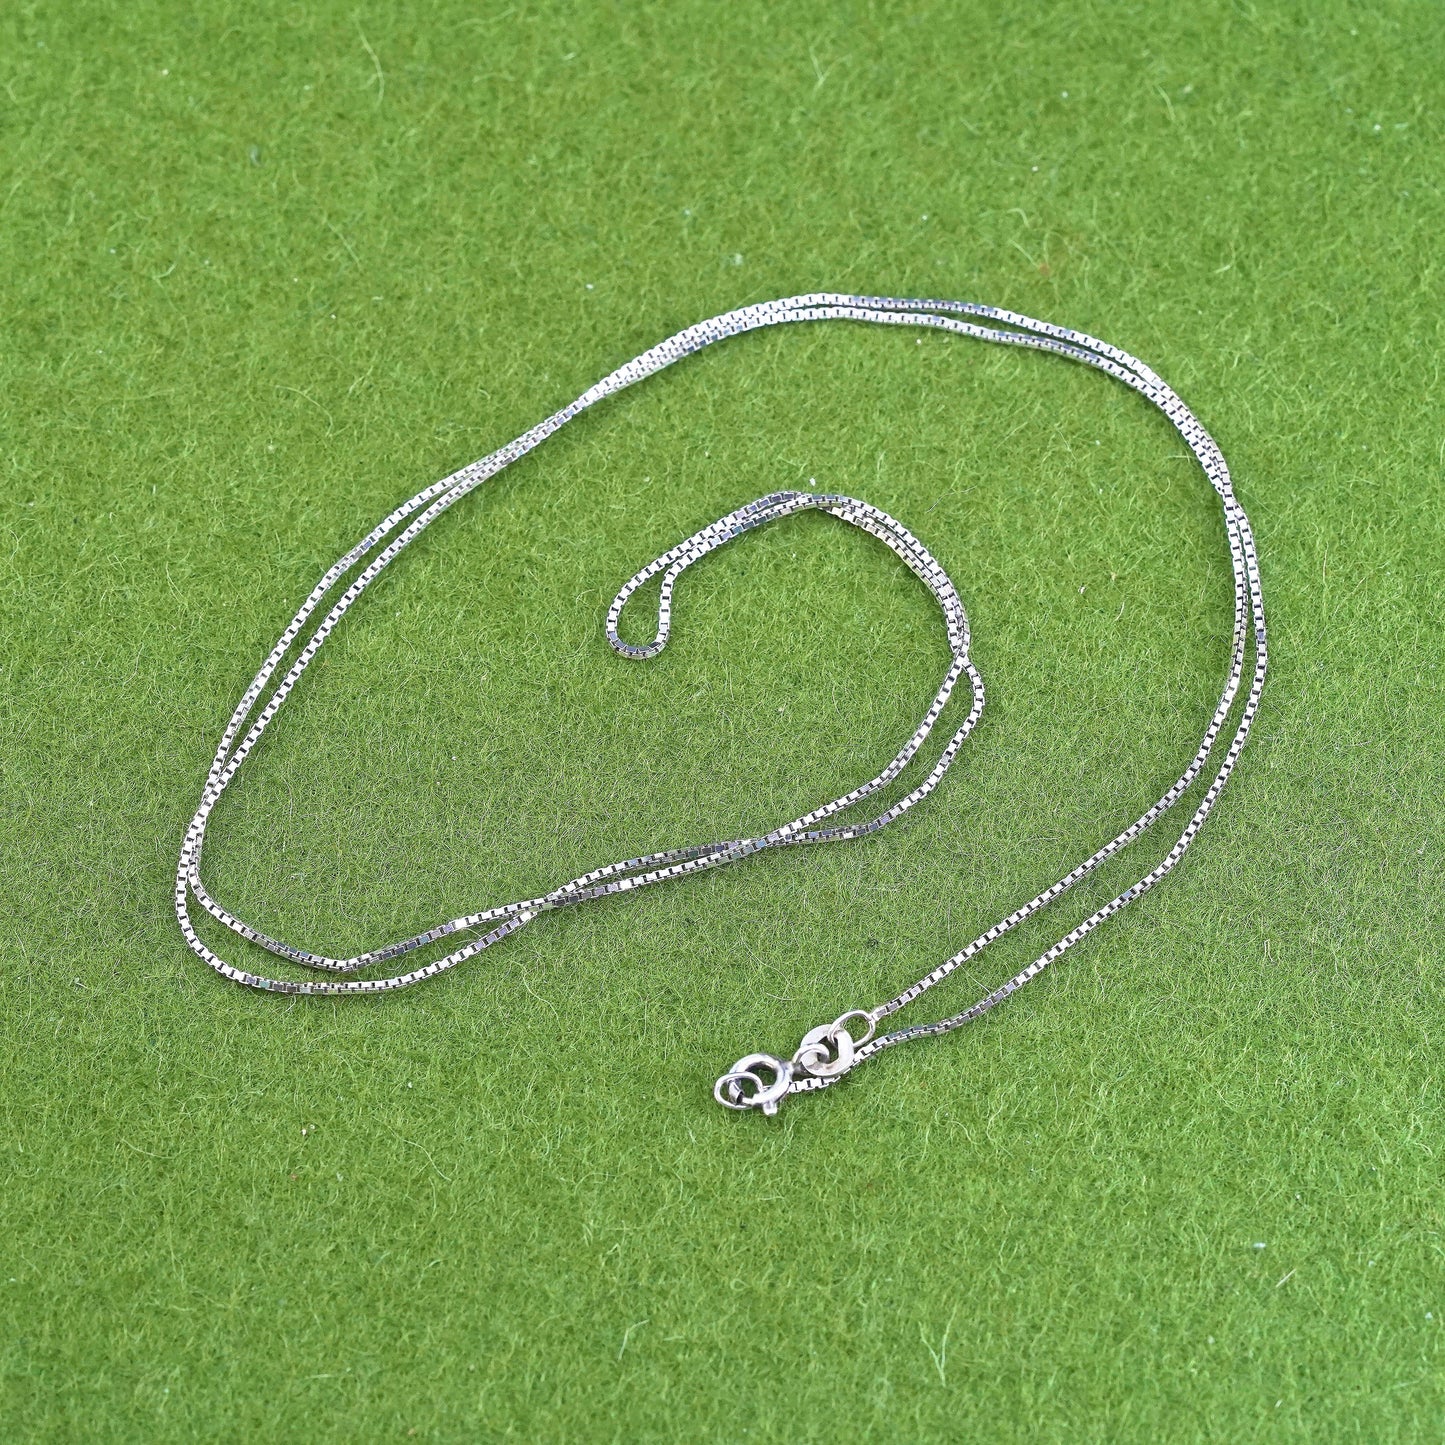 24", 1mm, Vintage Italian sterling 925 silver box chain, necklace